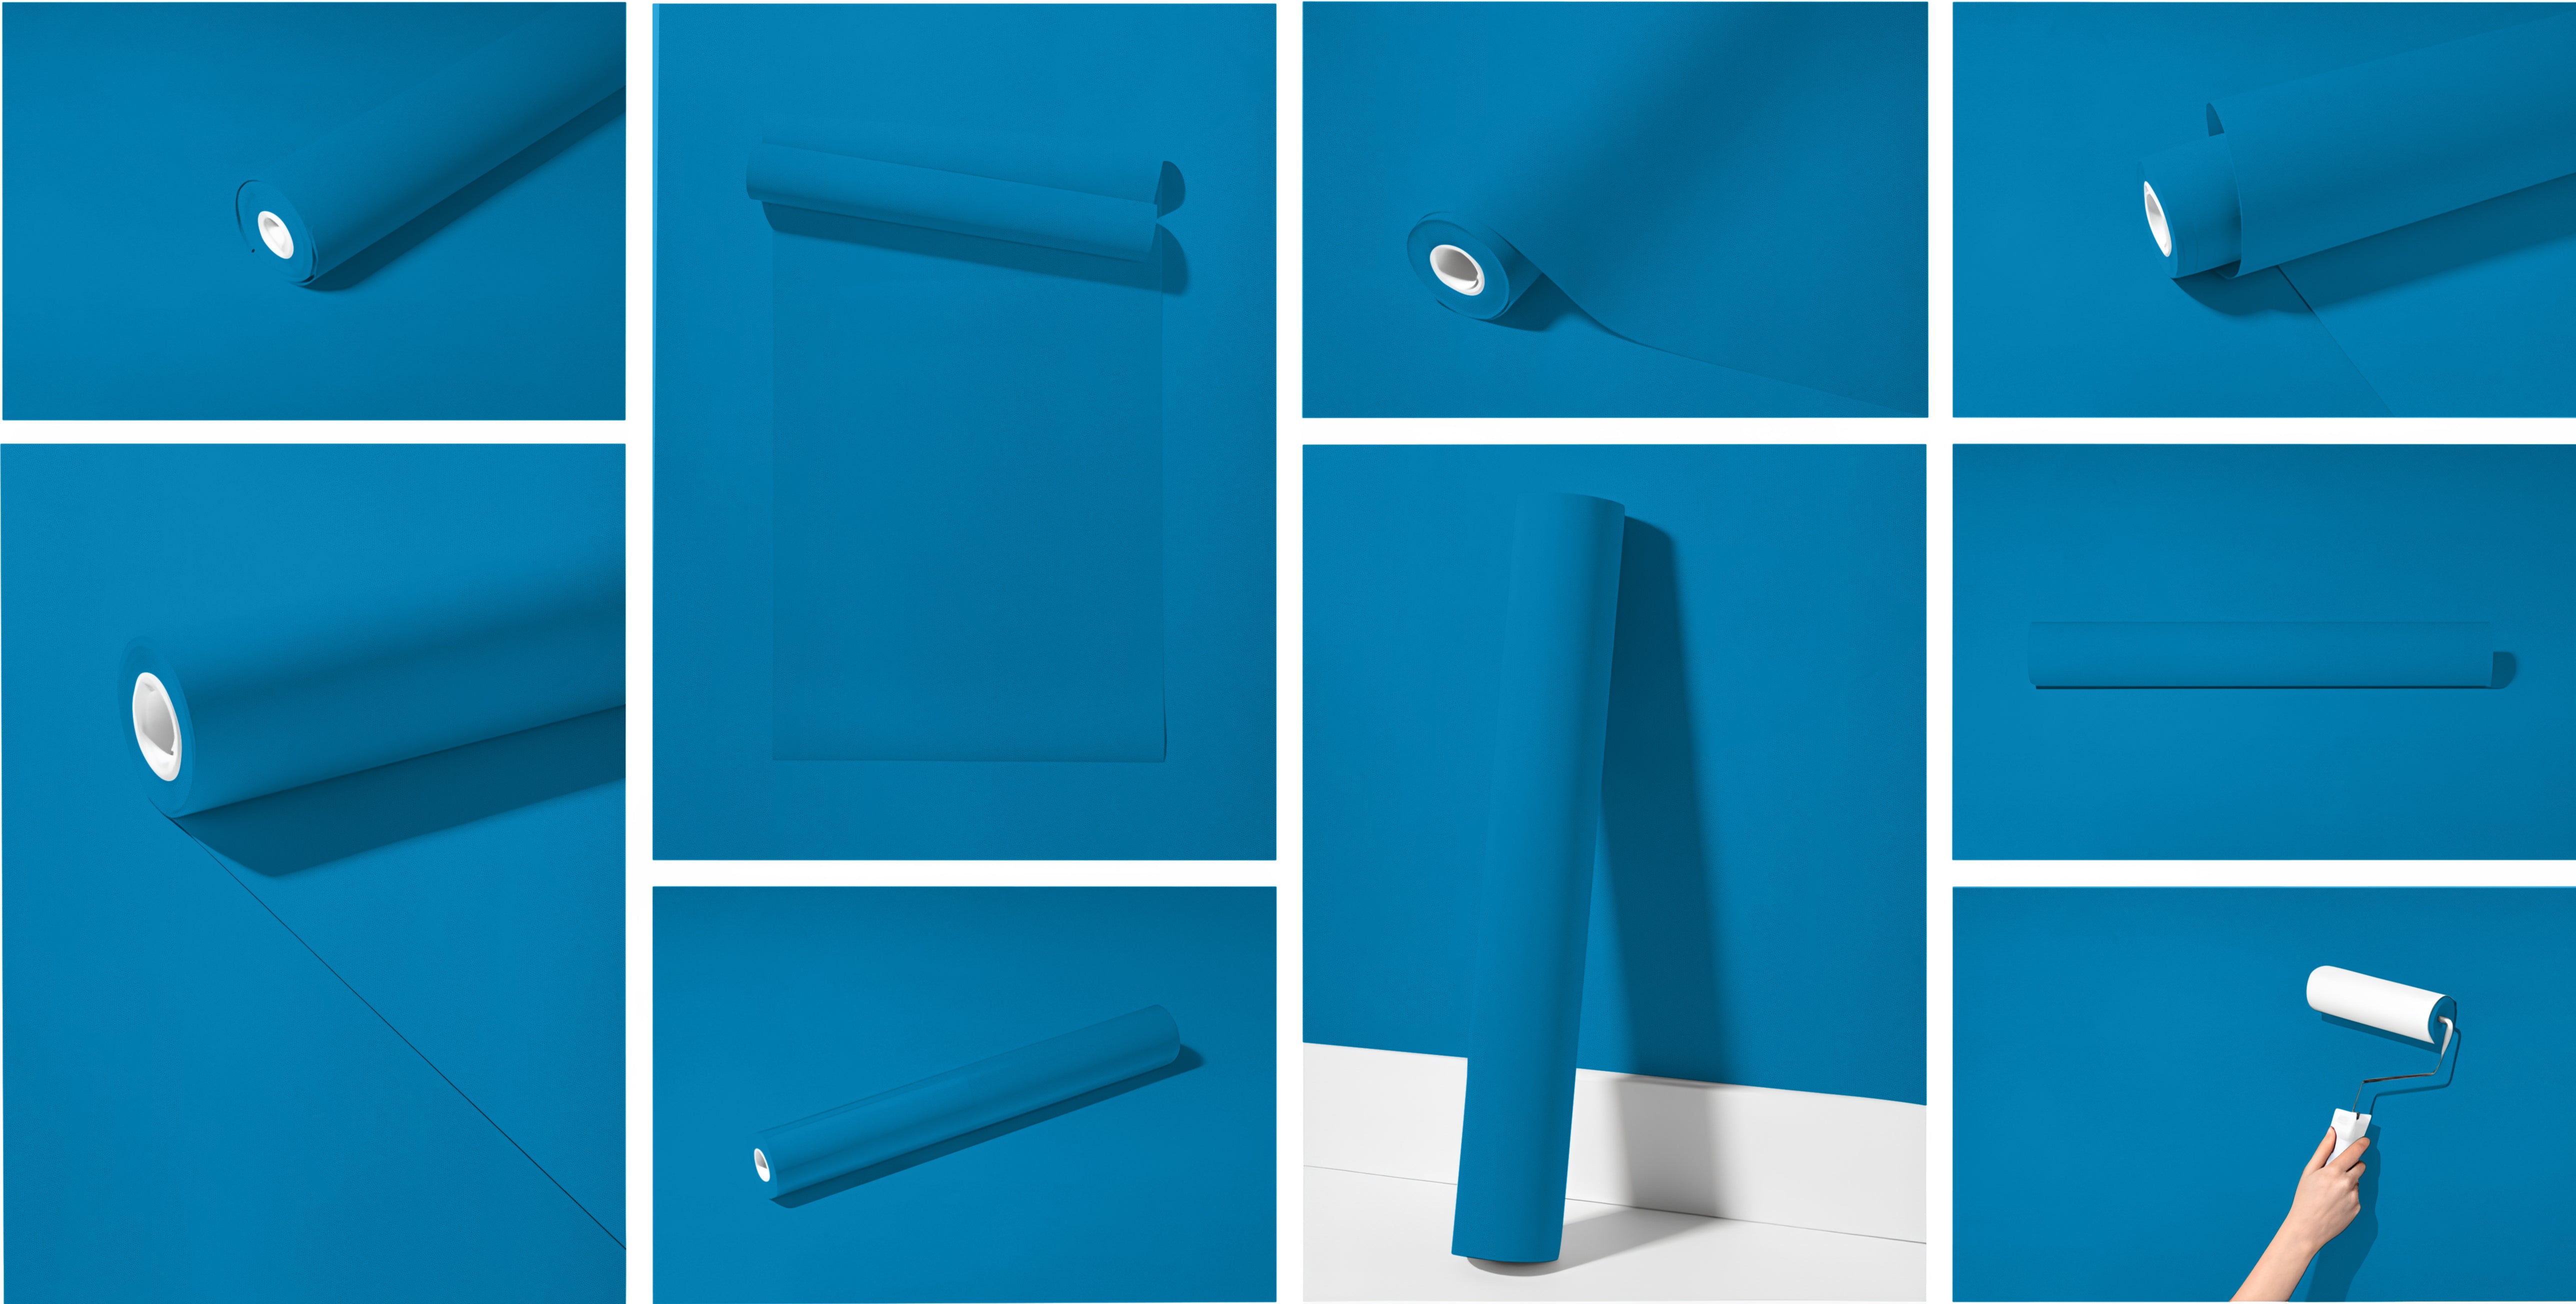 Peel & Stick Removable Re-usable Paint - Color RAL 5015 Sky Blue - offRAL™ - RALRAW LLC, USA